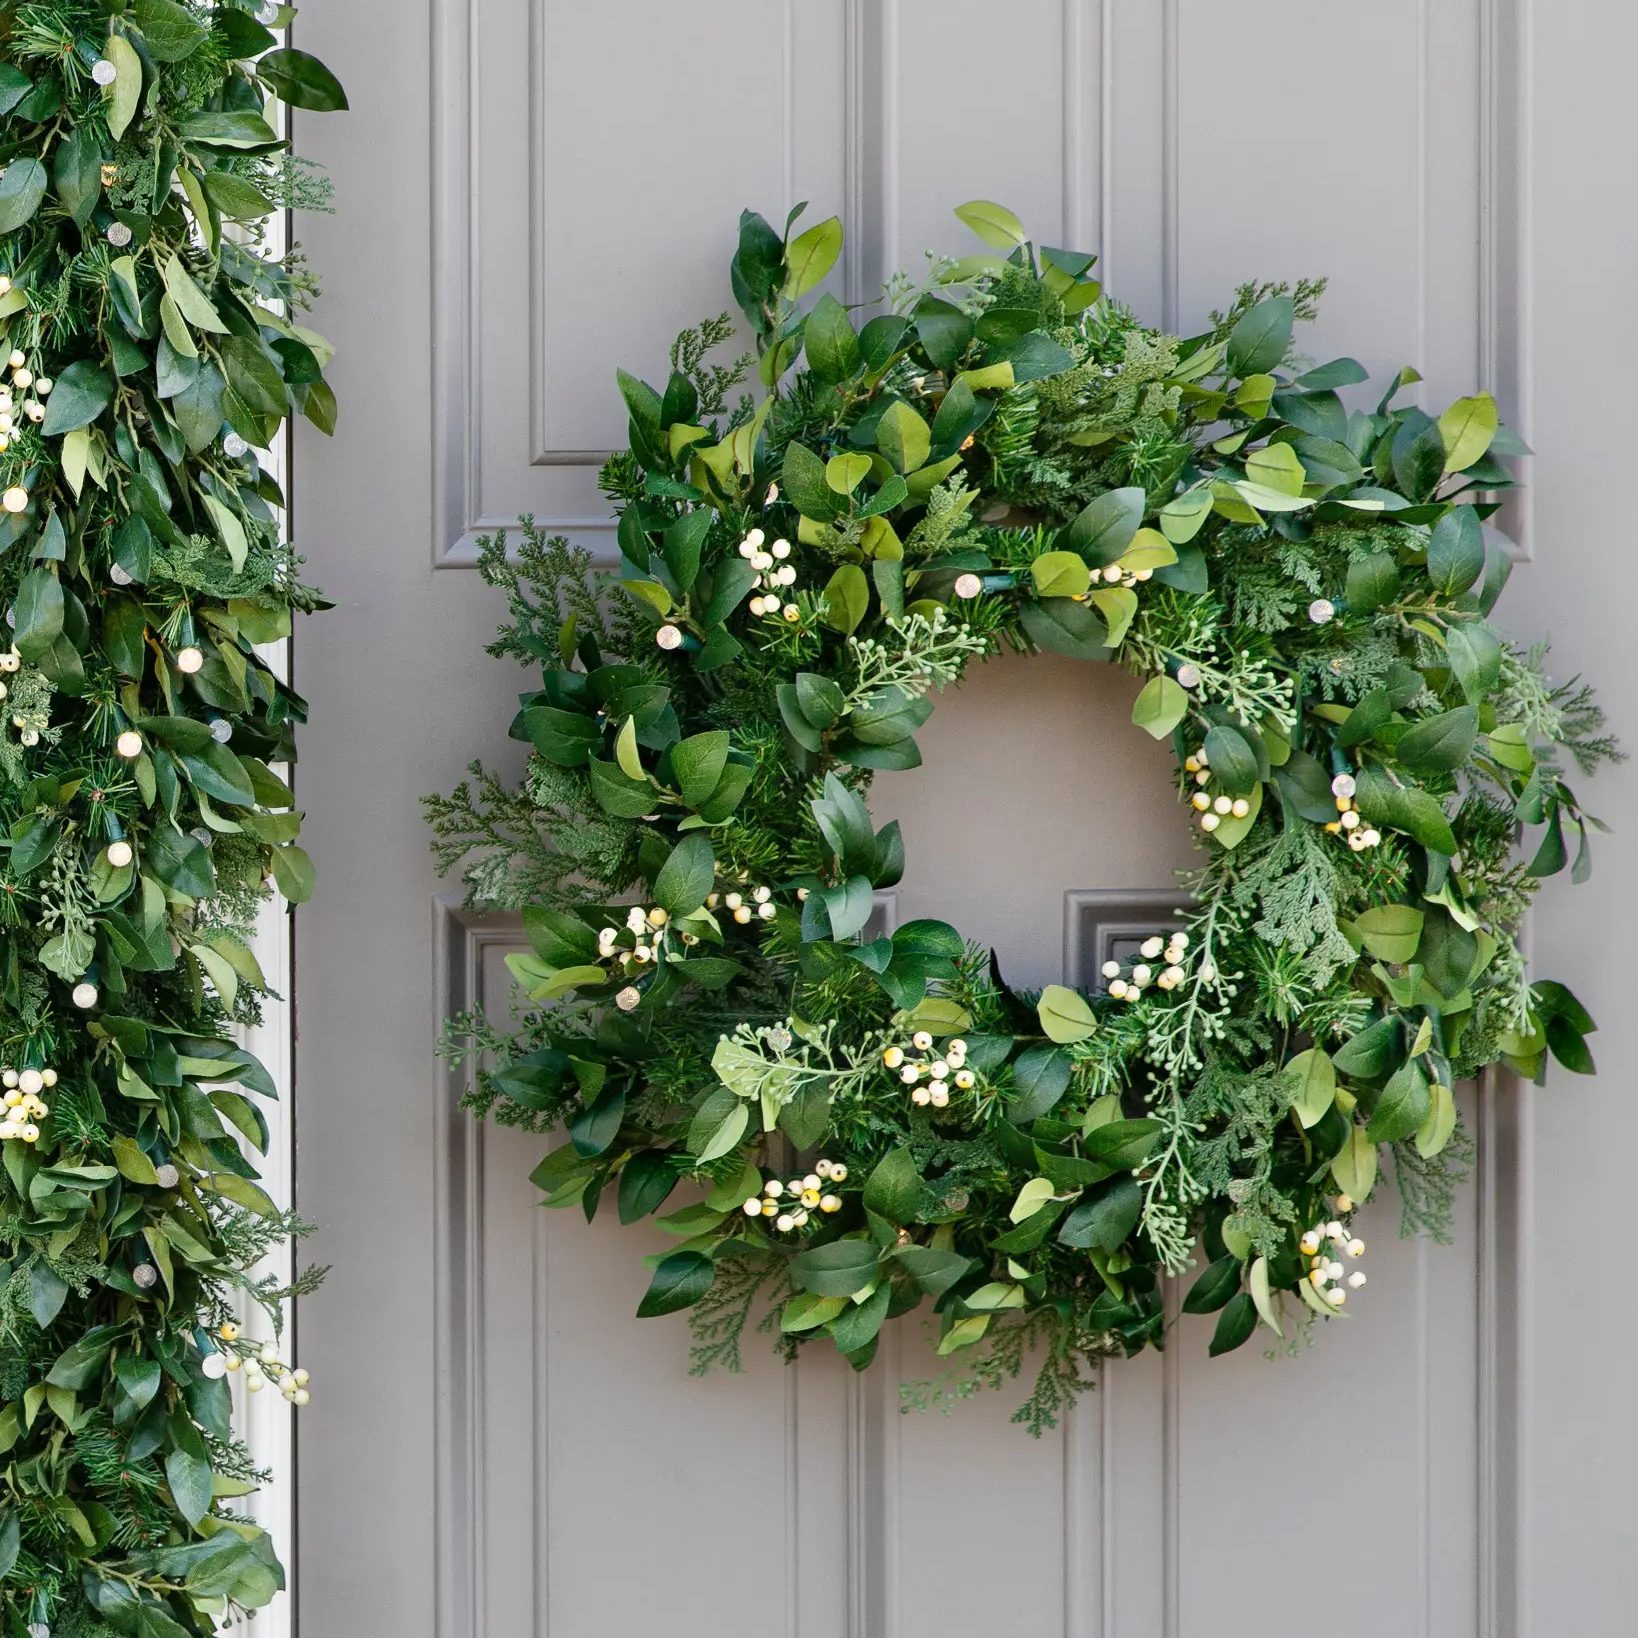 7 Festive Christmas Wreaths for Your Front Door